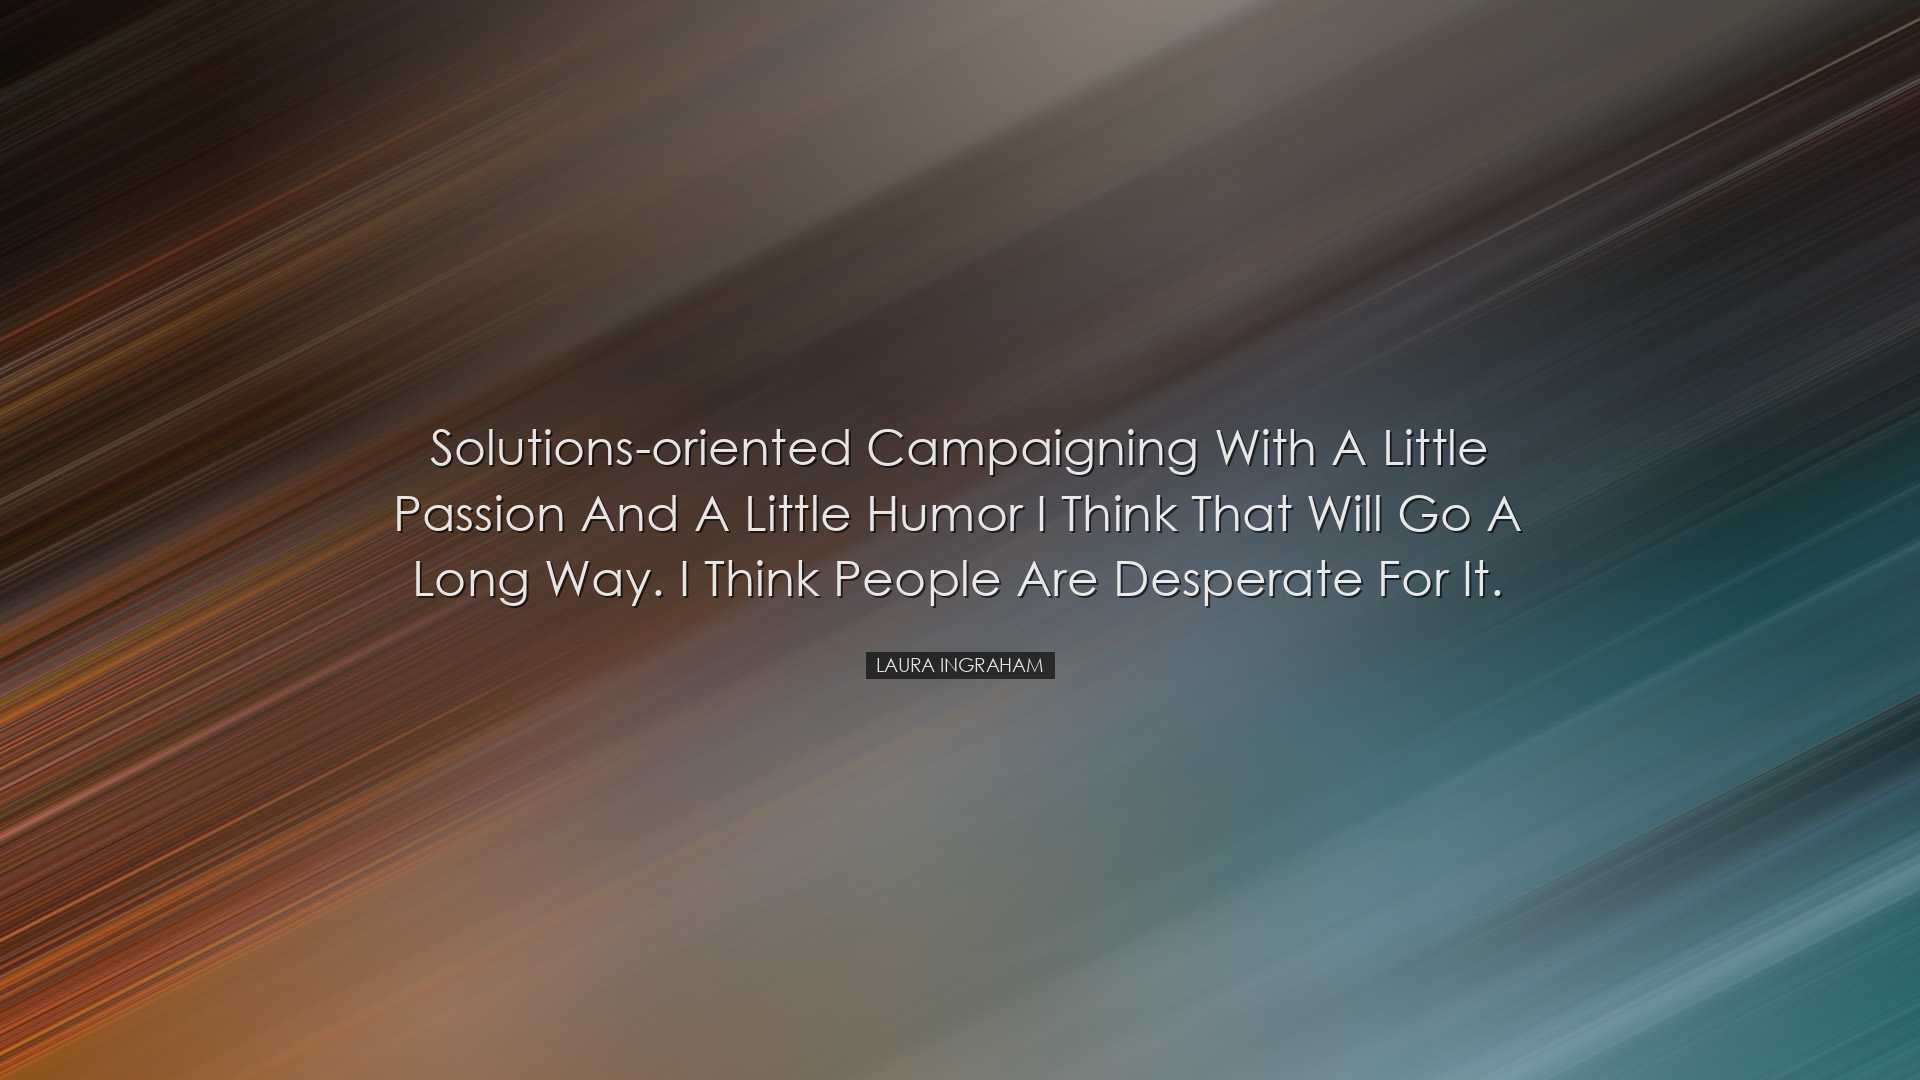 Solutions-oriented campaigning with a little passion and a little